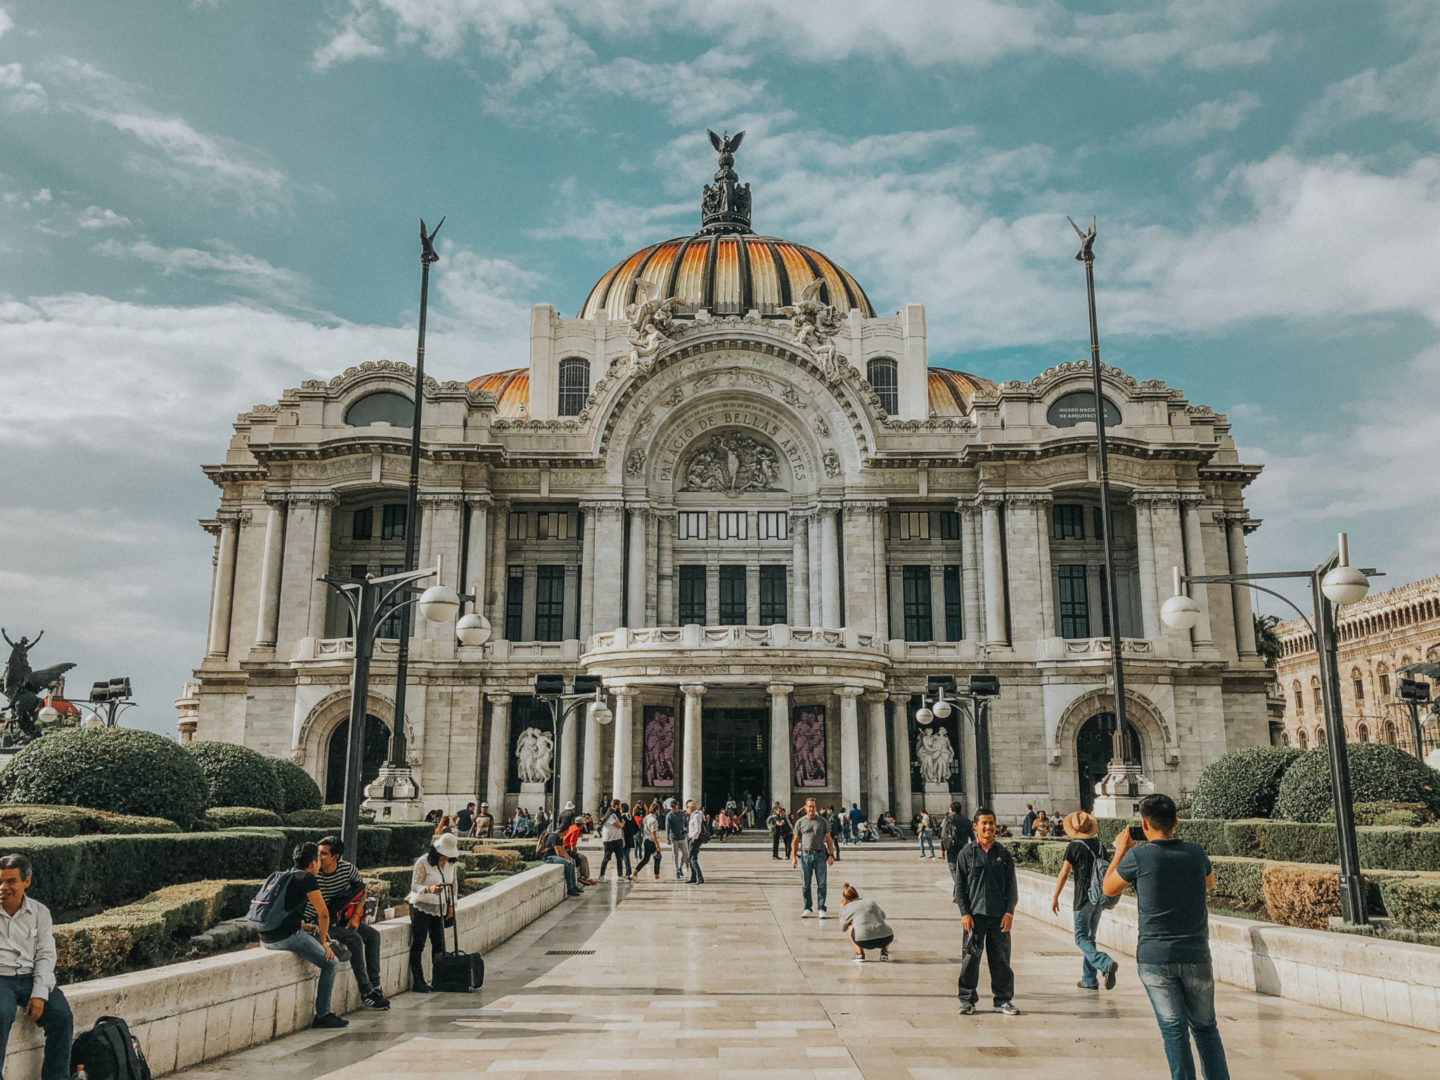 Mexico Travel: What To Do in Polanco, Mexico City: Our Guide